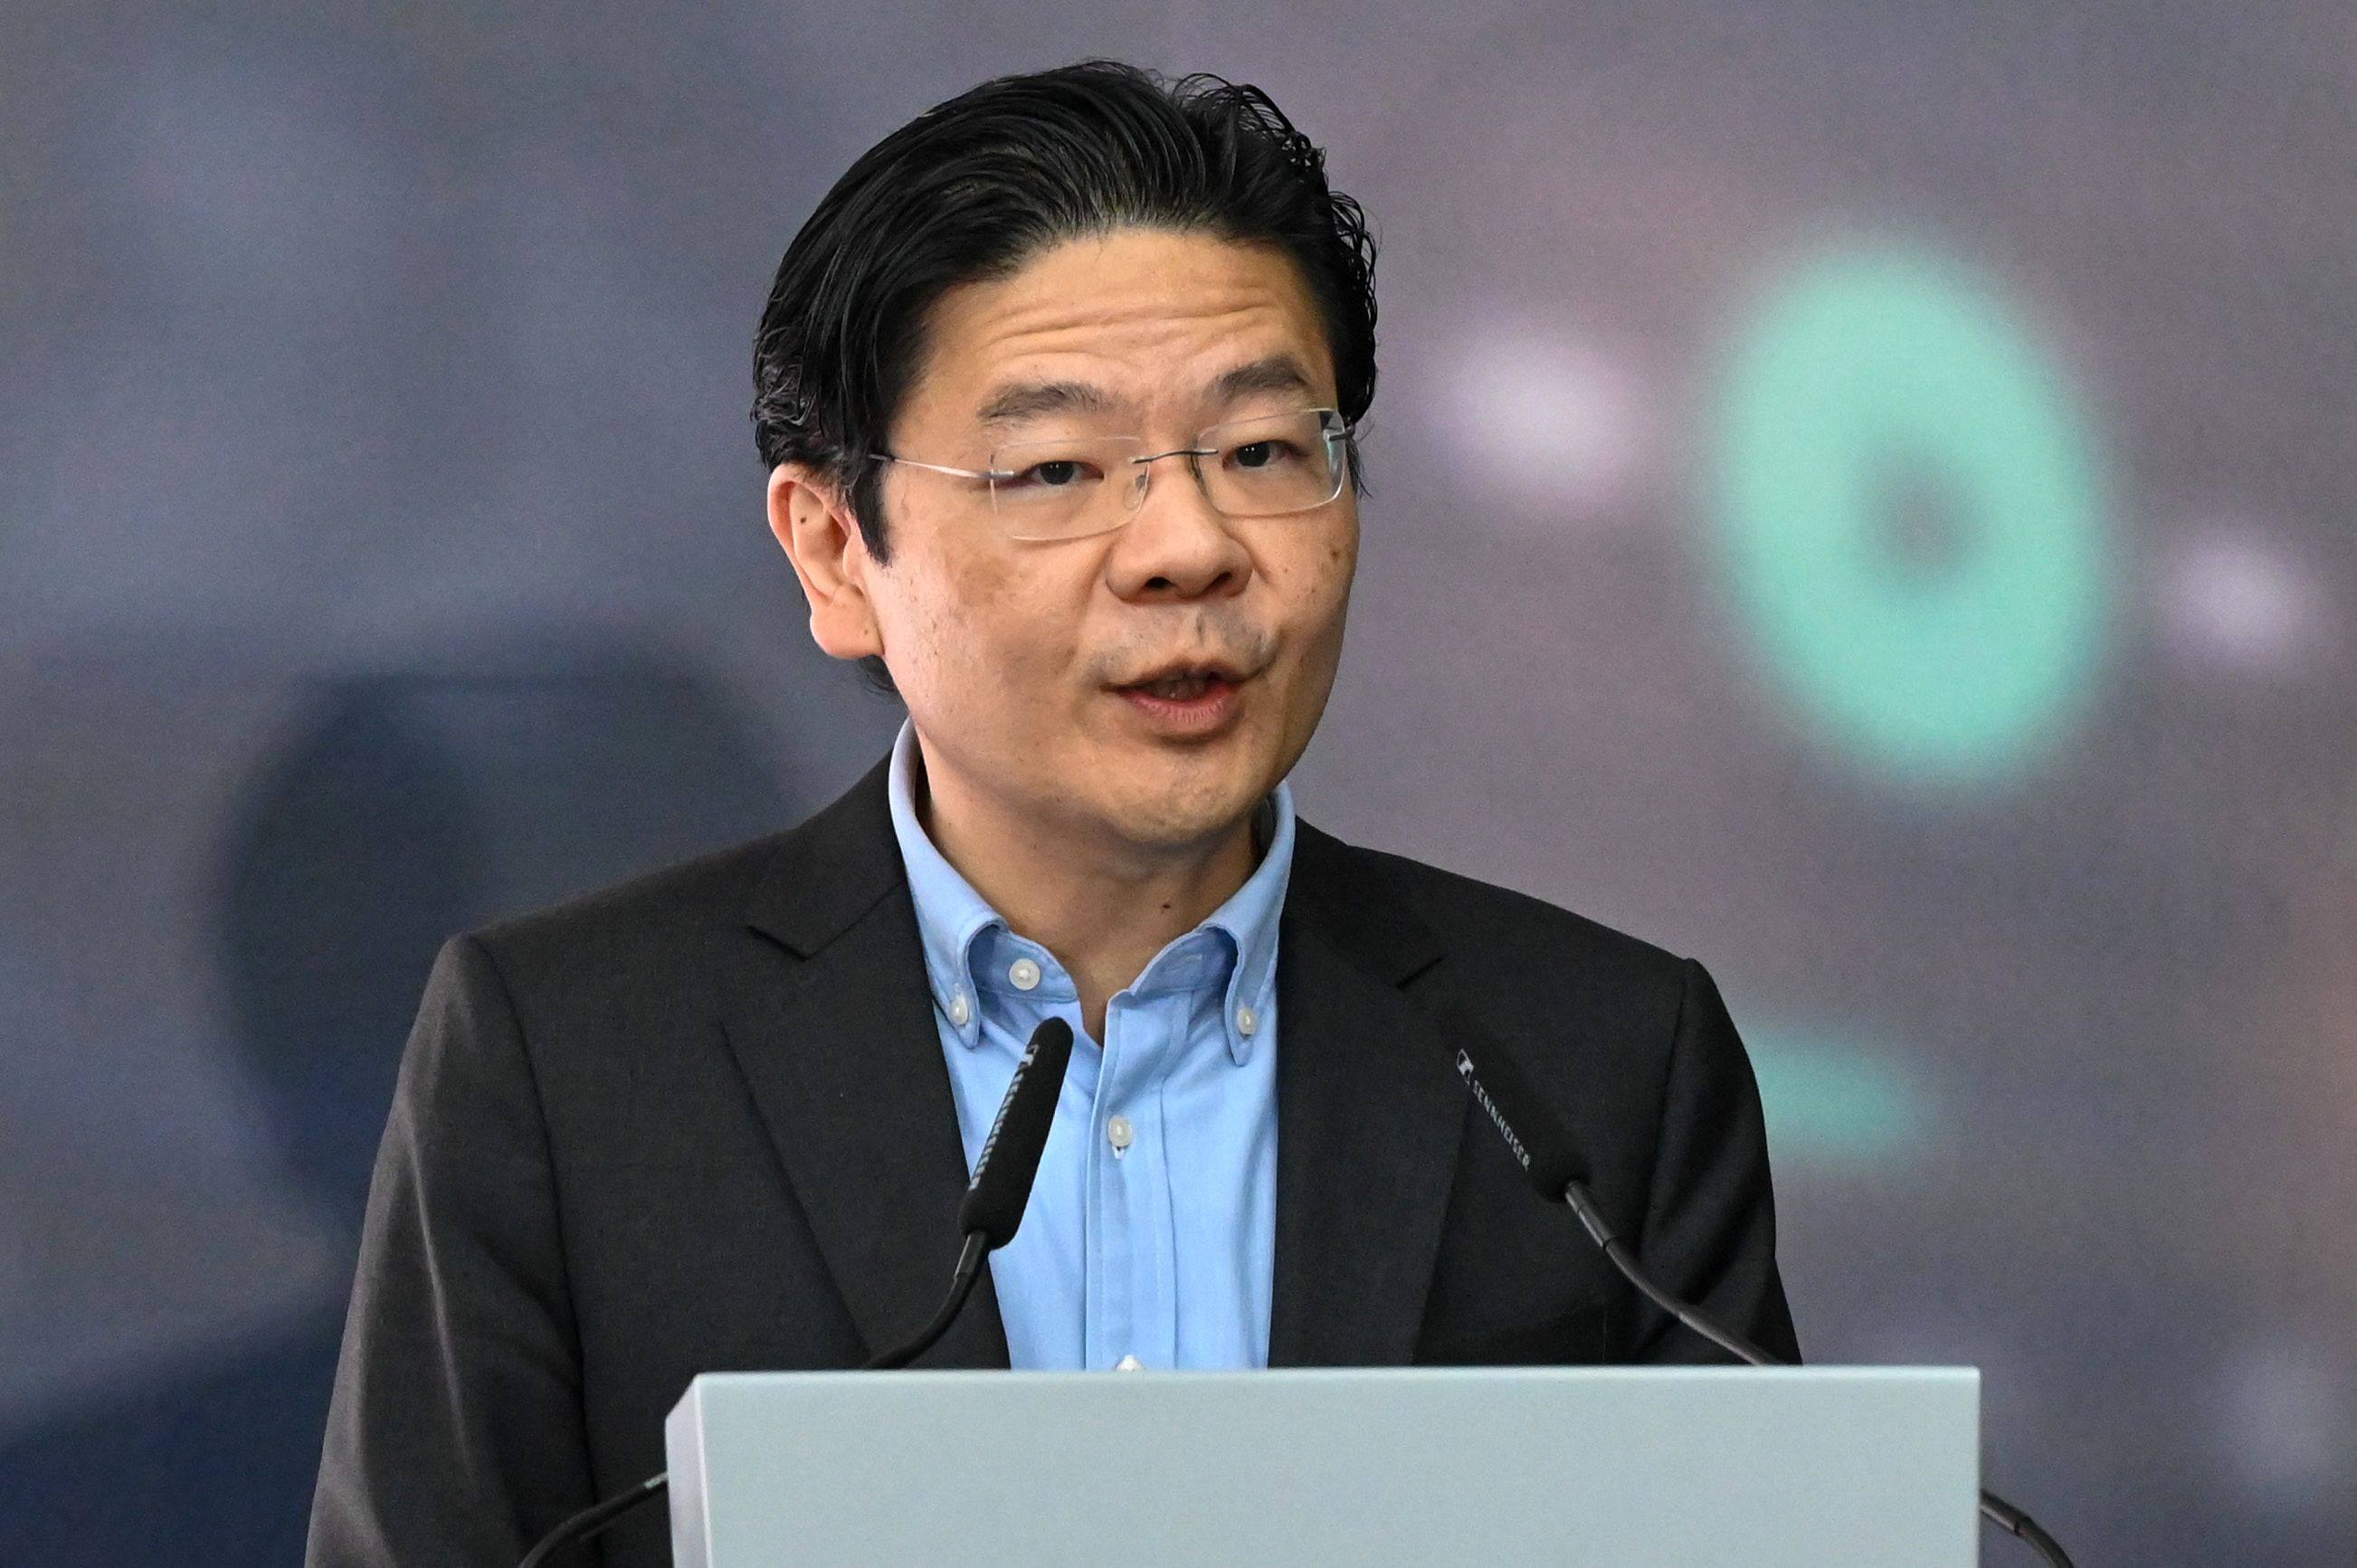 Deputy Prime Minister Lawrence Wong says Singapore will continue to take an approach aligned with international laws. Photo: AFP 